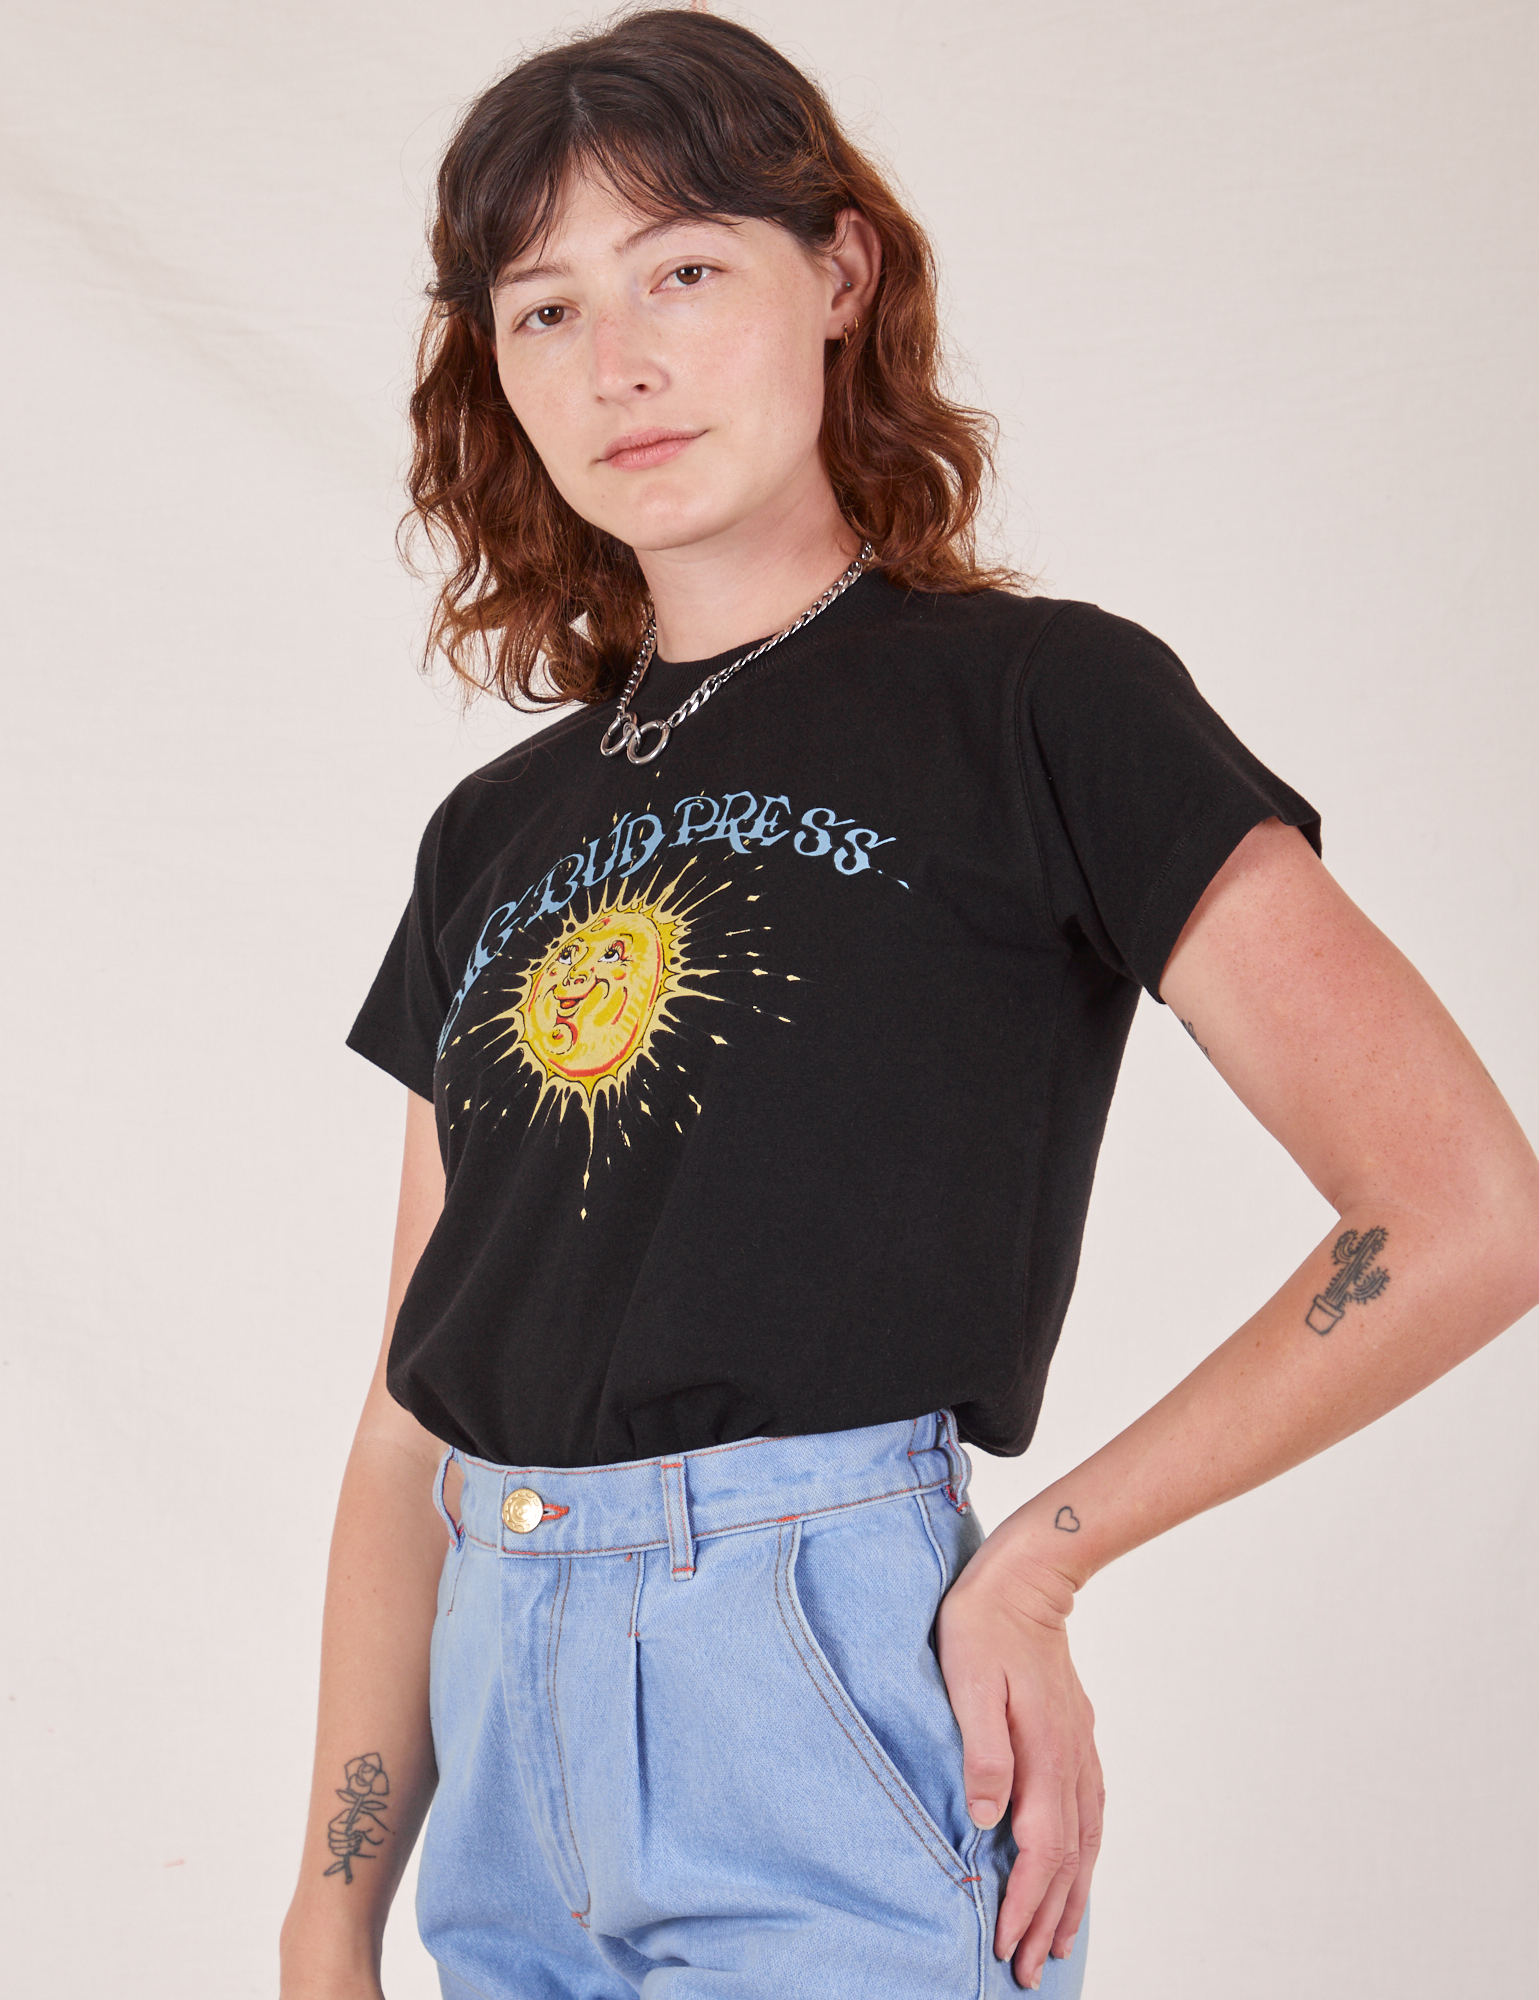 Sun Baby Organic Tee in Basic Black angled front view on Alex